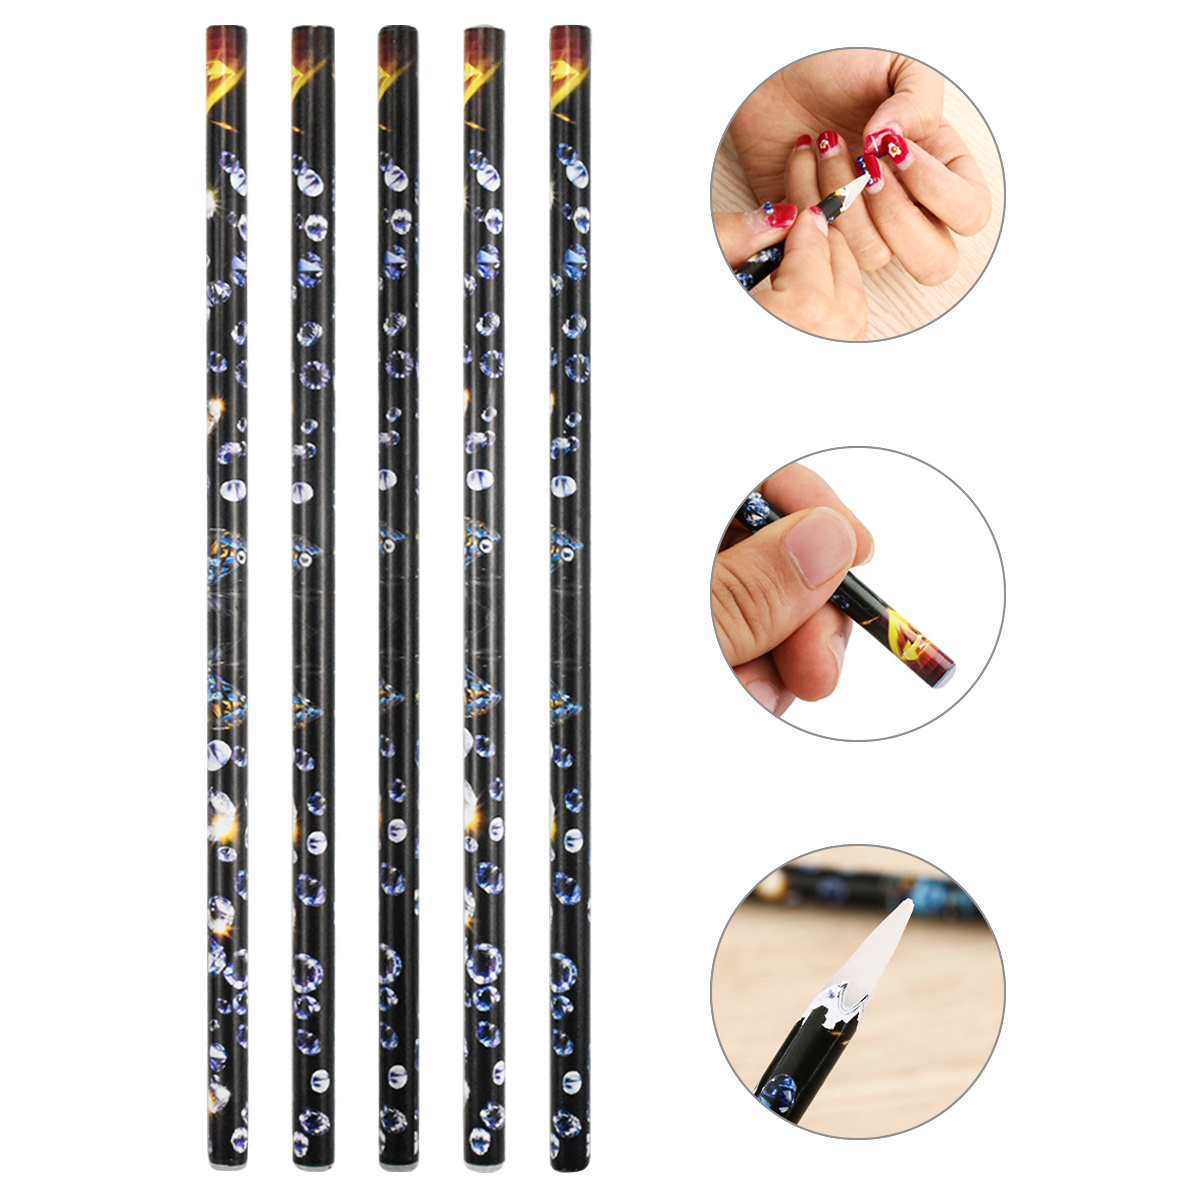 10PCS Pieces Nail Art Dotting Pen, Rhinestone Picker Dottings Pencil,  Picking Up Stones Wax Pencil, DIY Manicure Tools for Jewelry Making Craft  Diamond Embroidery Paste Sticker